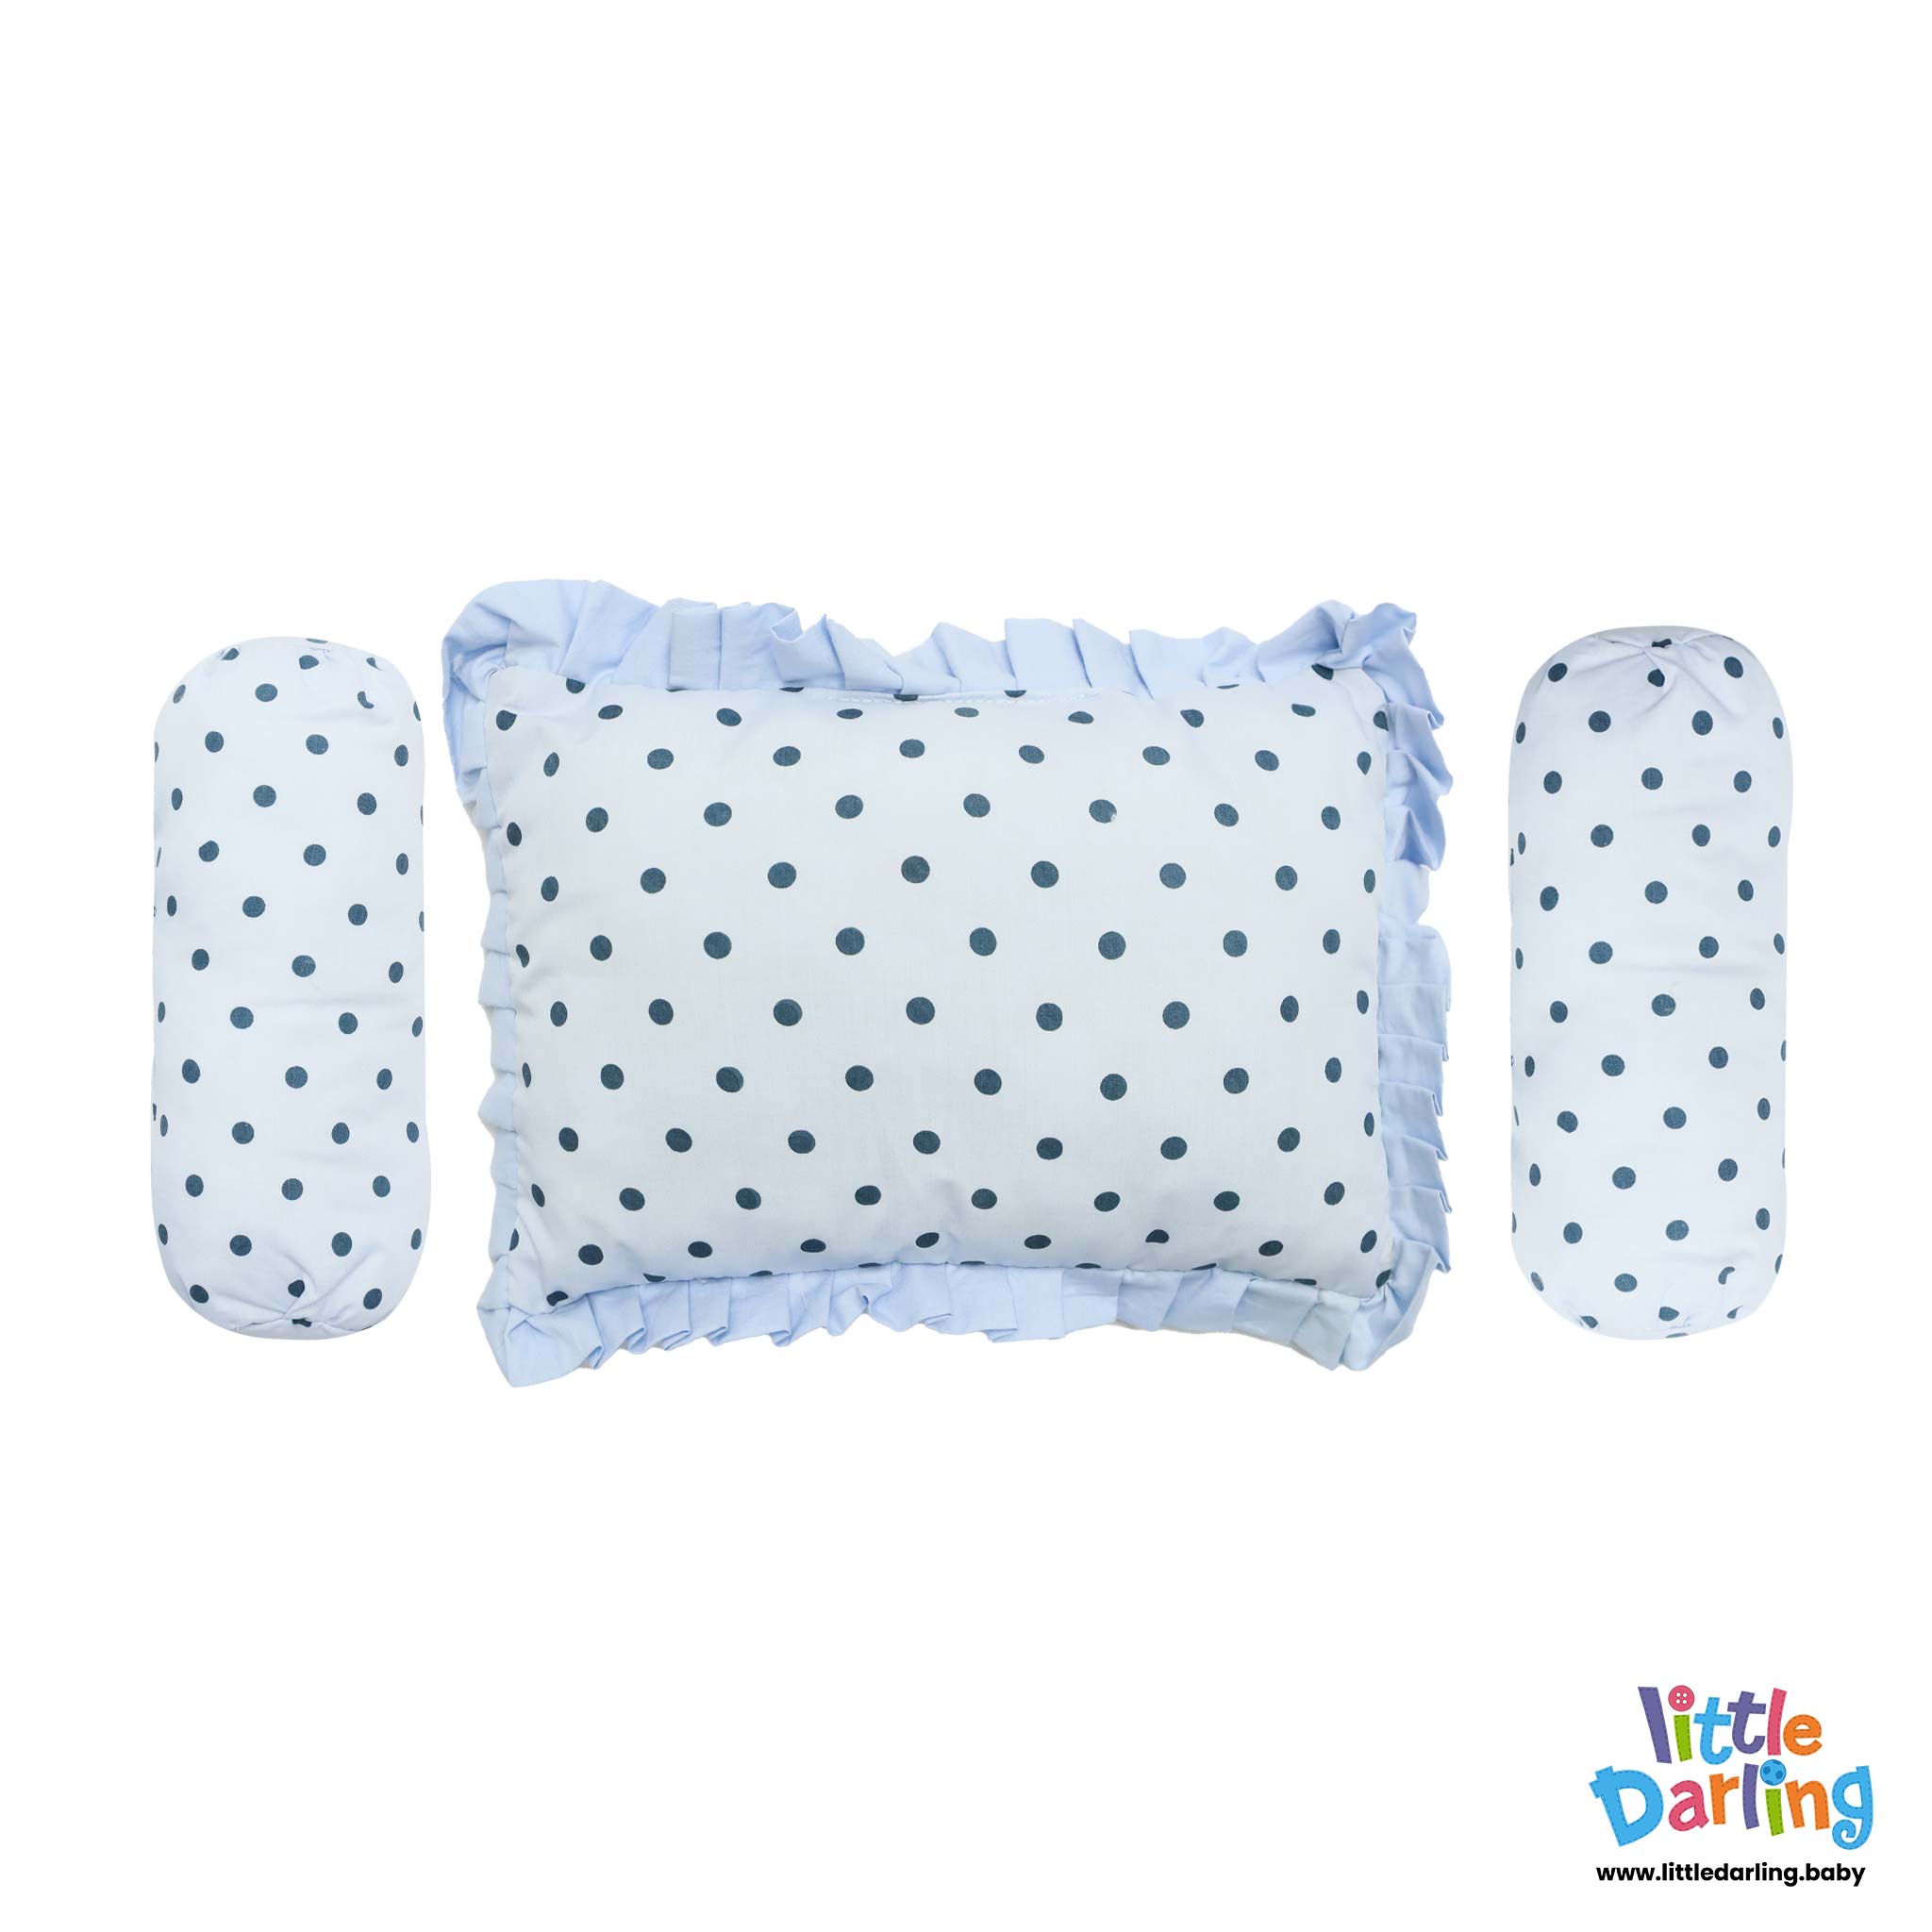 Baby Pillow Set Pk Of 3 Sky Blue Color by Little Darling